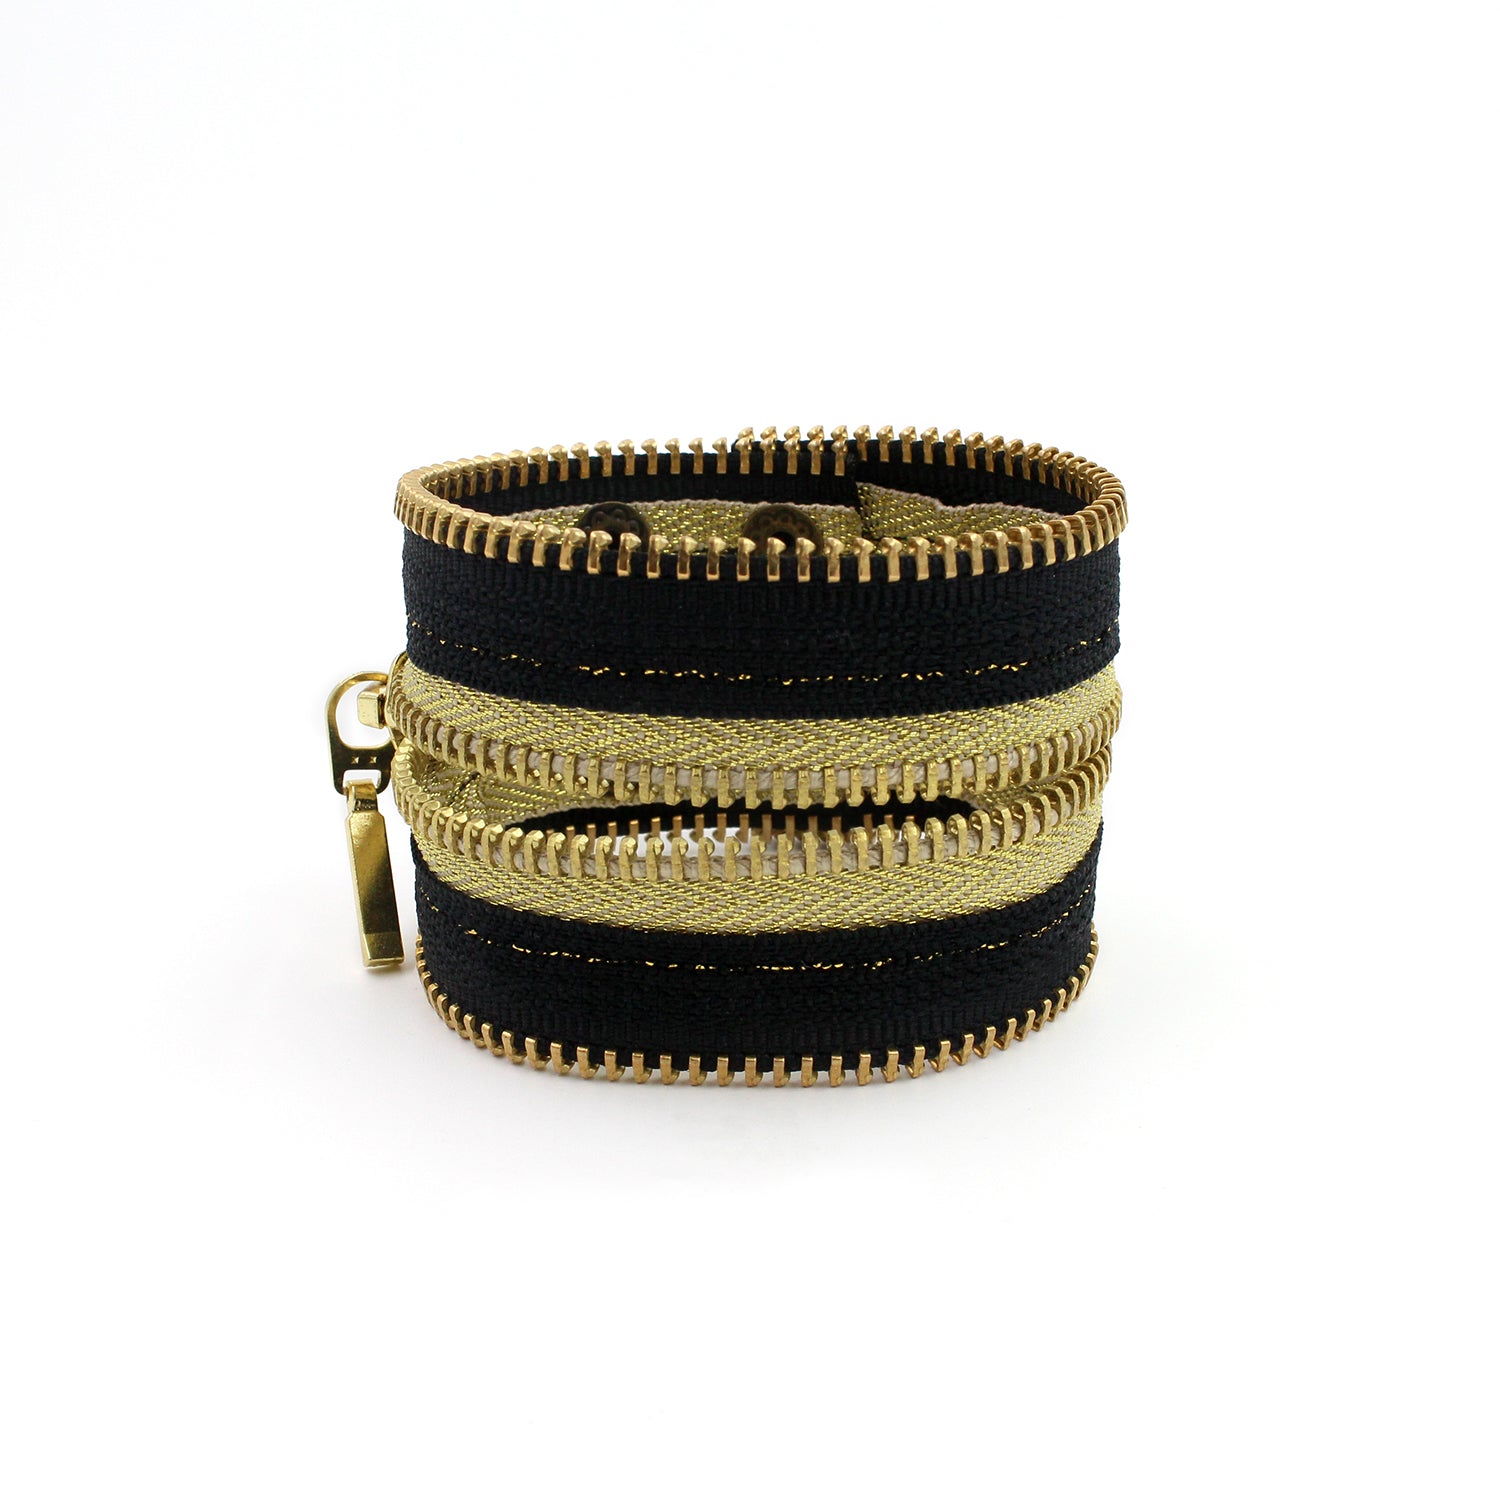 Special Edition Golden Knights Zip Bracelet – Made to Order!